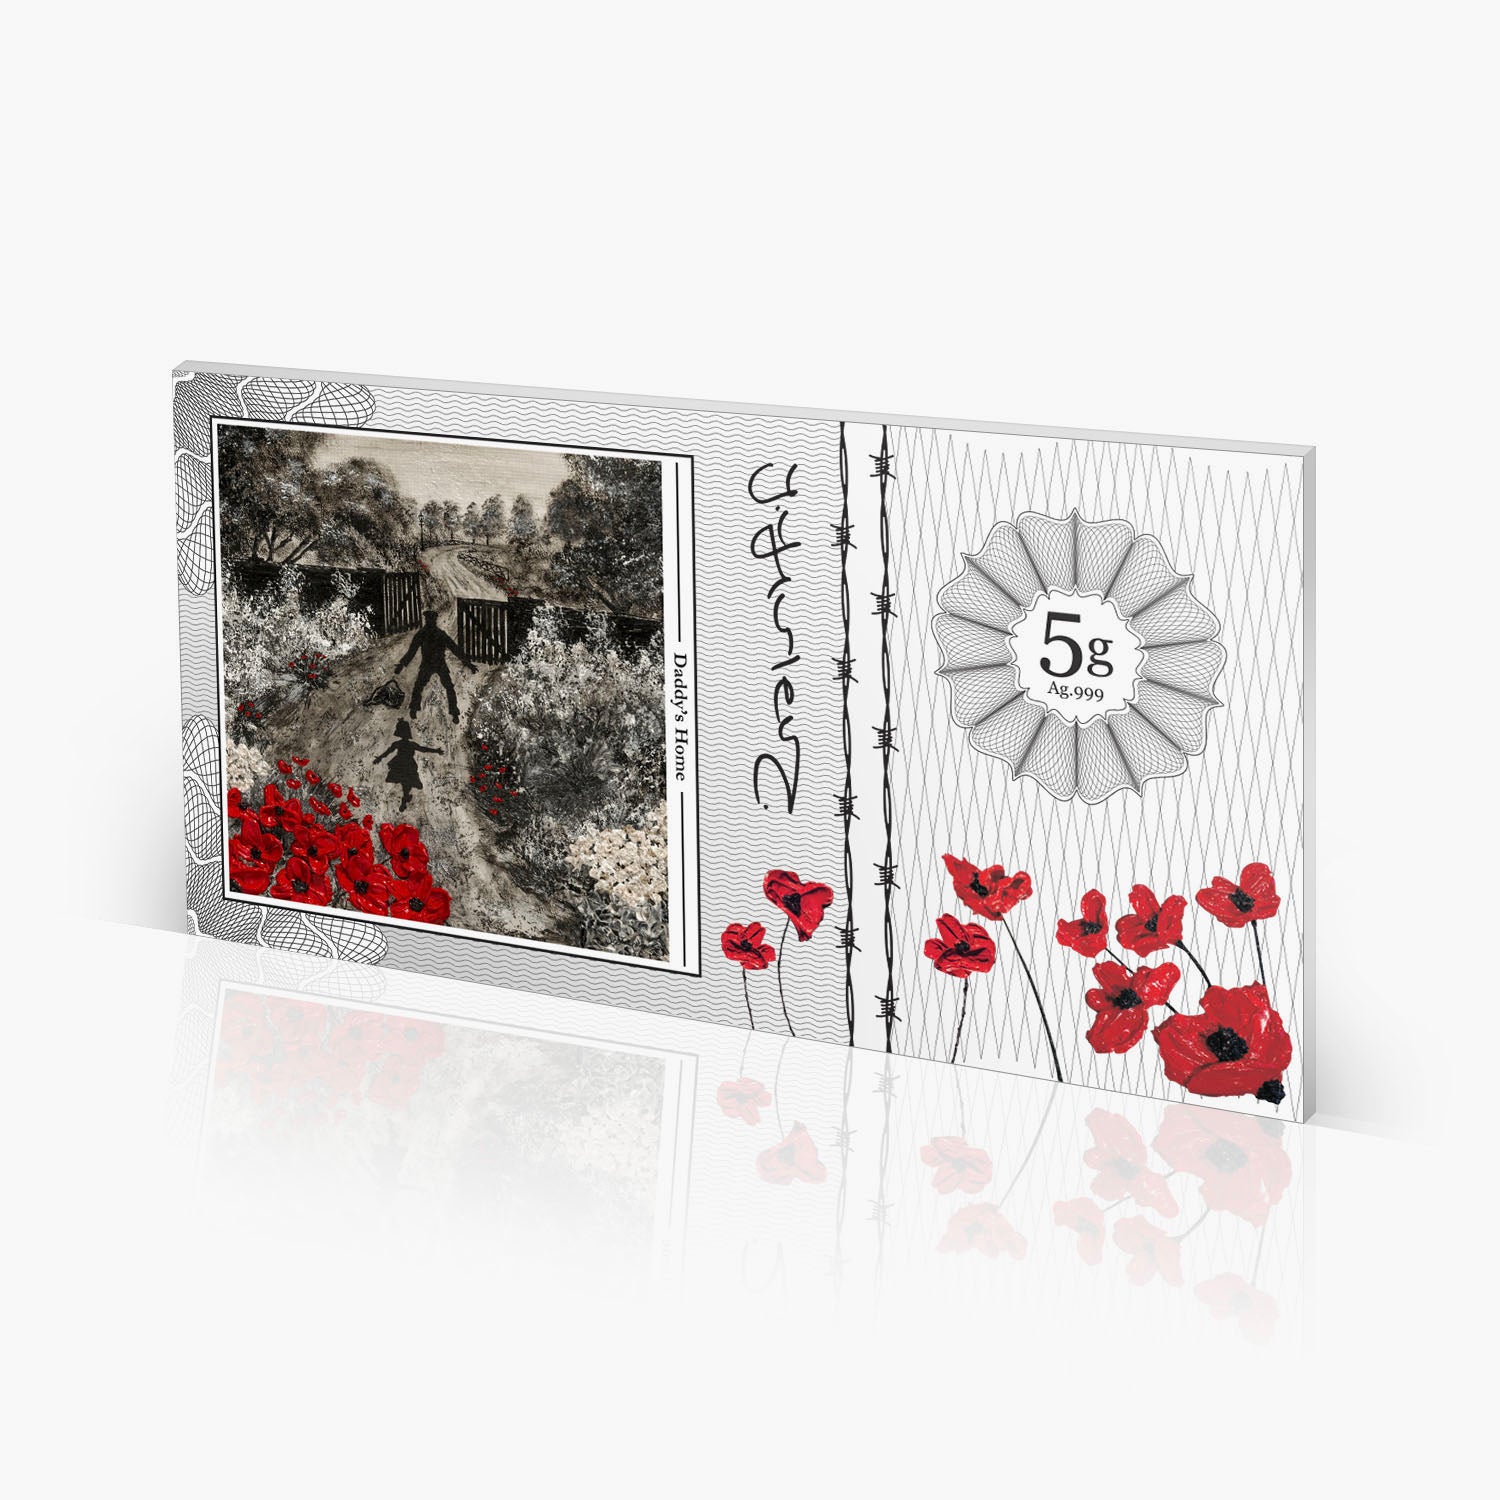 The War Poppy 'Daddy's Home' 5g Pure Silver Note